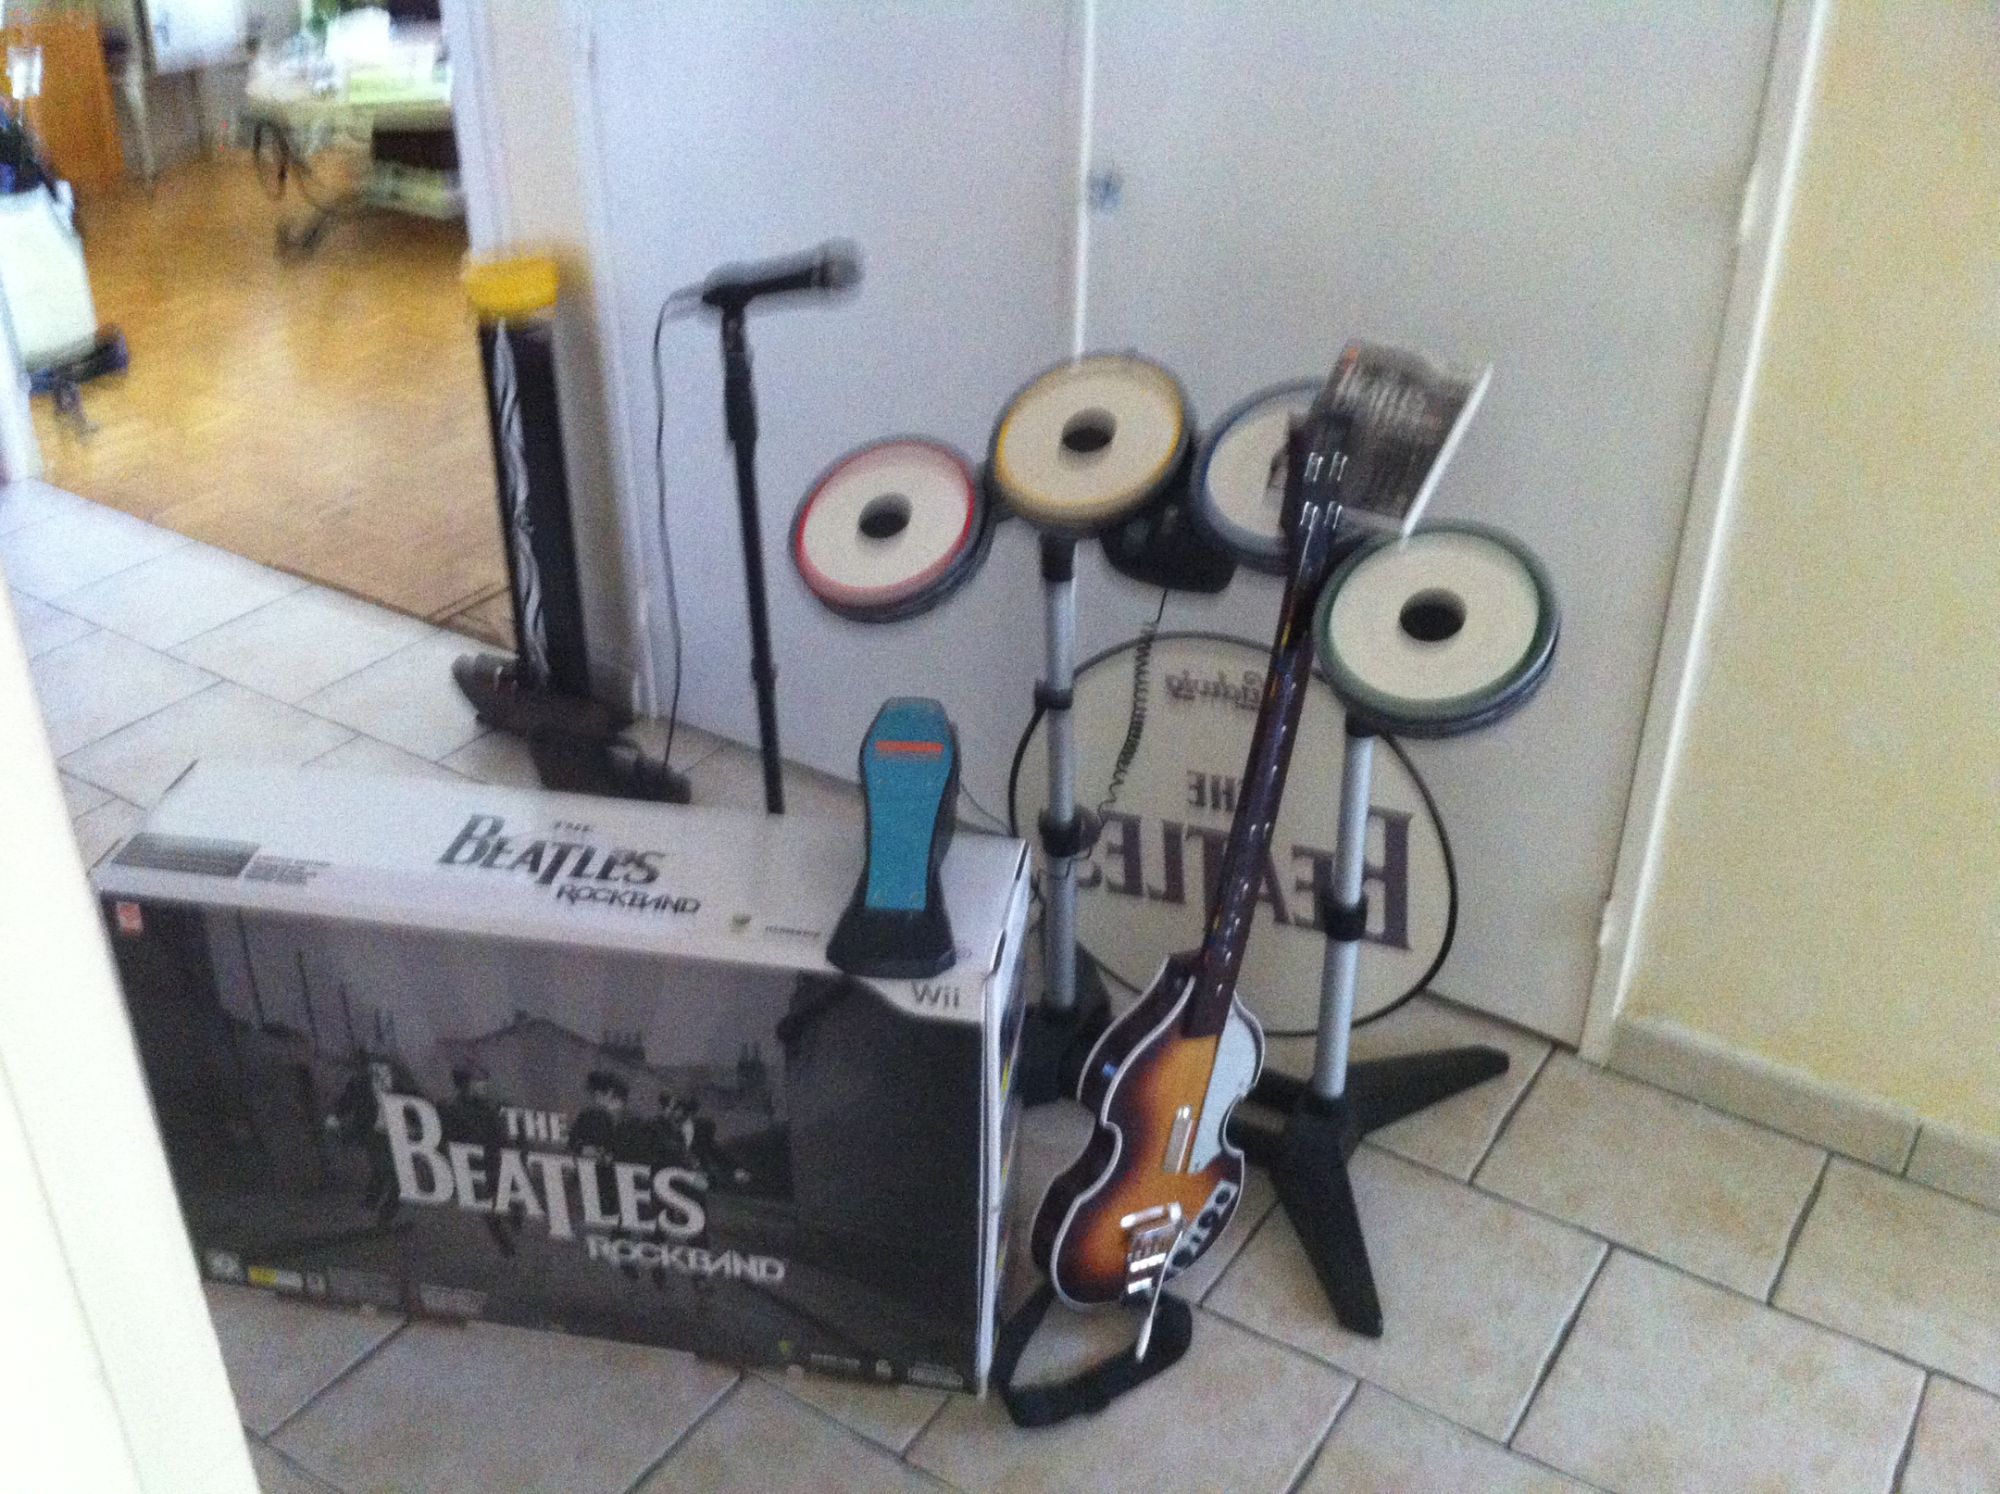 The Beatles Rock Band - Limited Edition